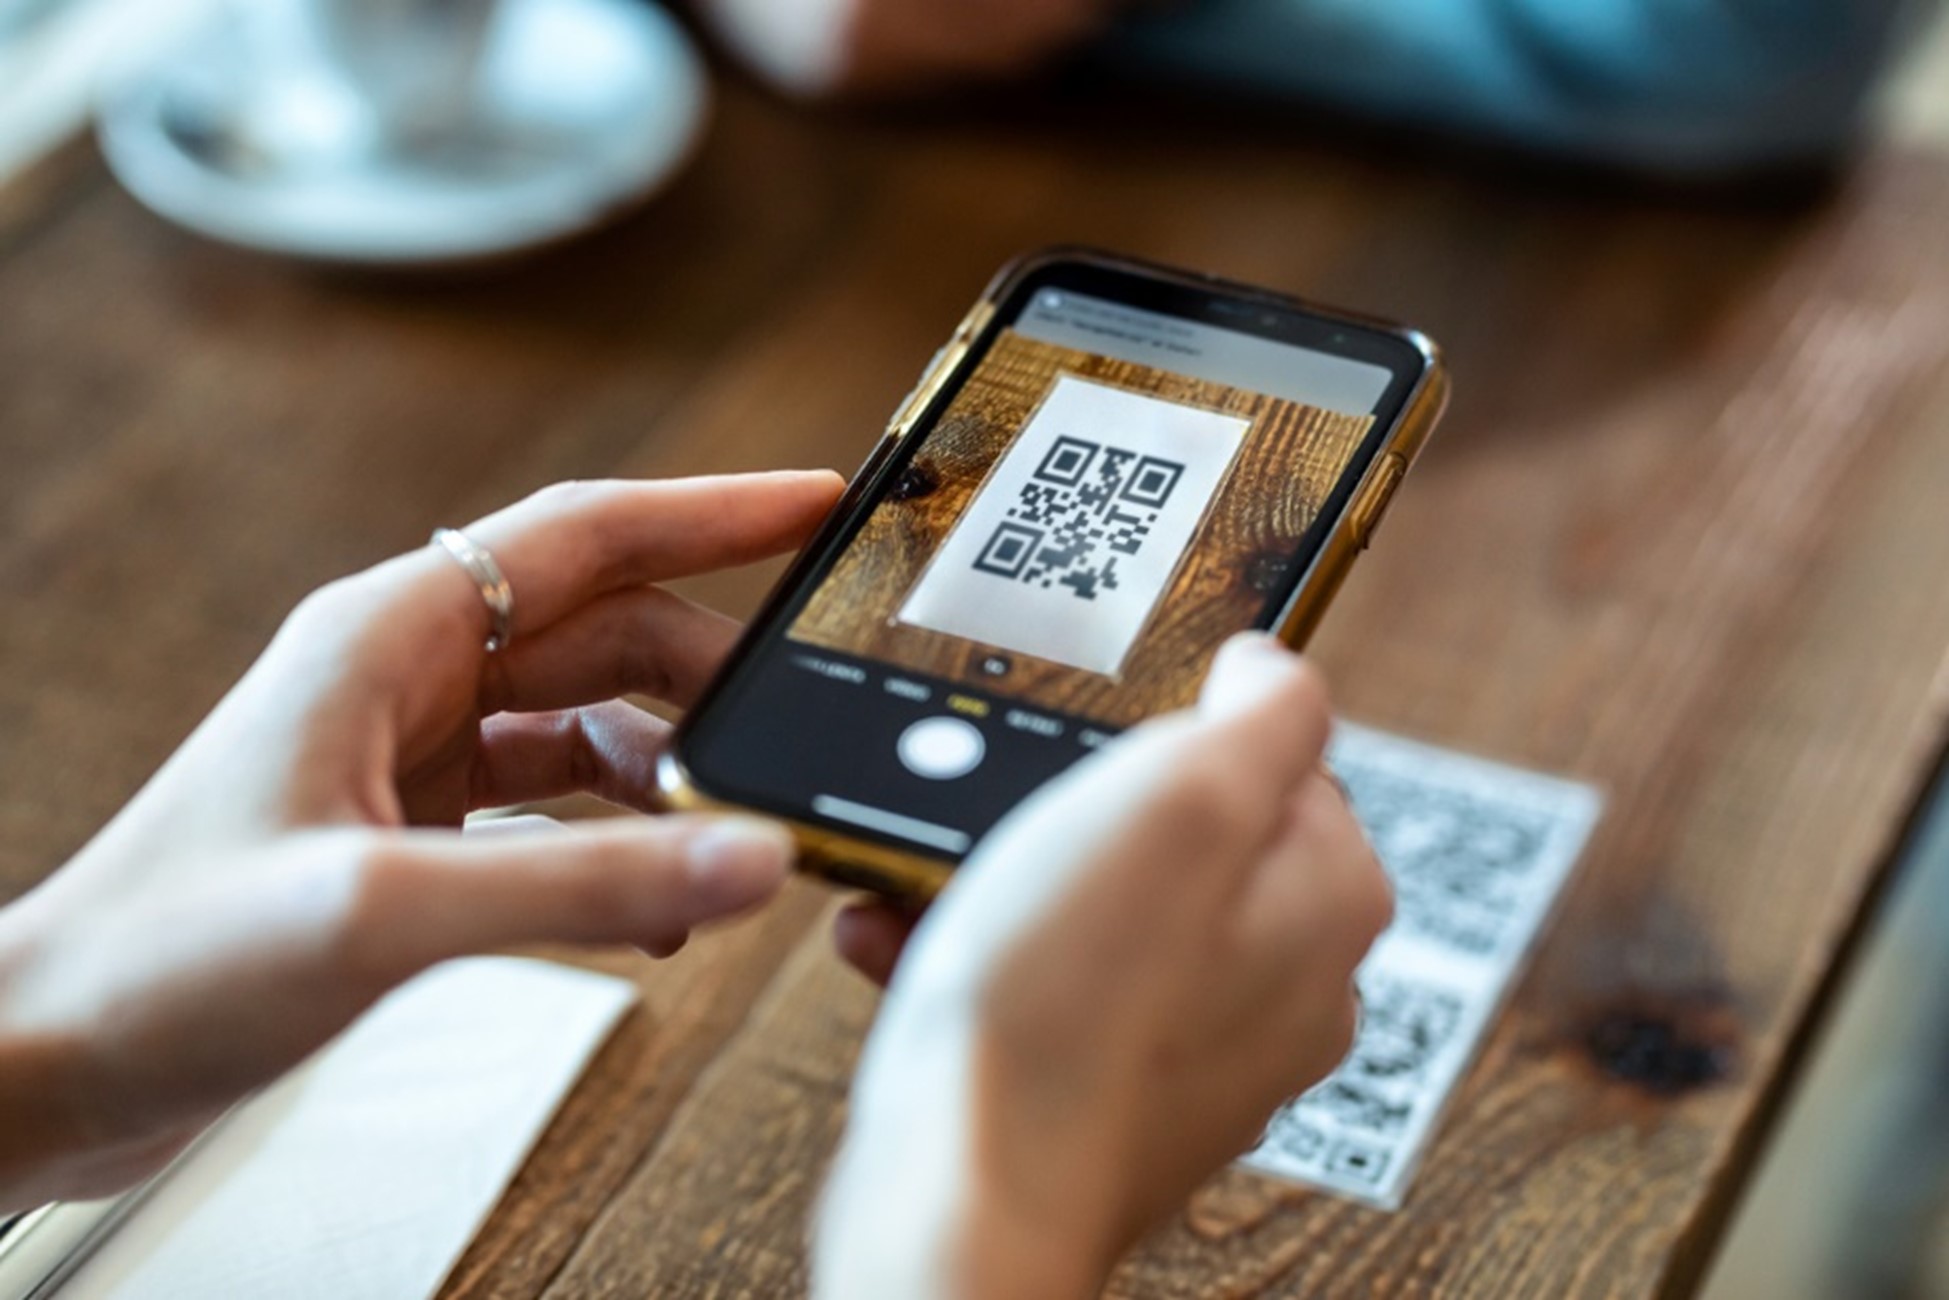 When starting a restaurant business with no money, consider getting a qr code menu